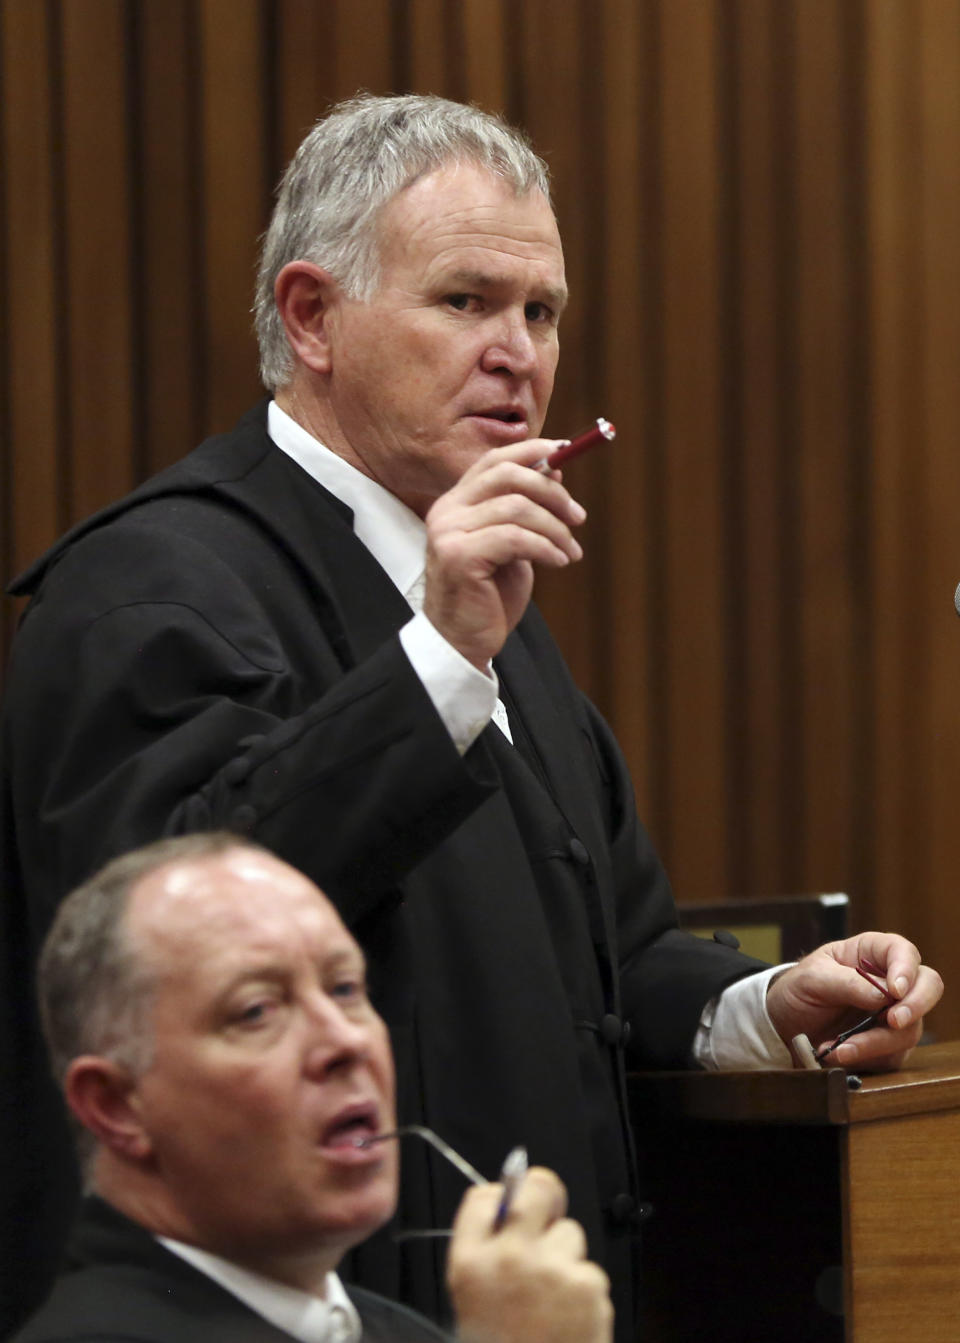 Attorney for Oscar Pistorius, Barry Roux gestures during cross questioning in court during Pistorius' trial at the high court in Pretoria, South Africa, Friday, March 7, 2014. Pistorius is charged with murder for the shooting death of his girlfriend, Steenkamp, on Valentines Day in 2013. (AP Photo/Themba Hadebe, Pool)